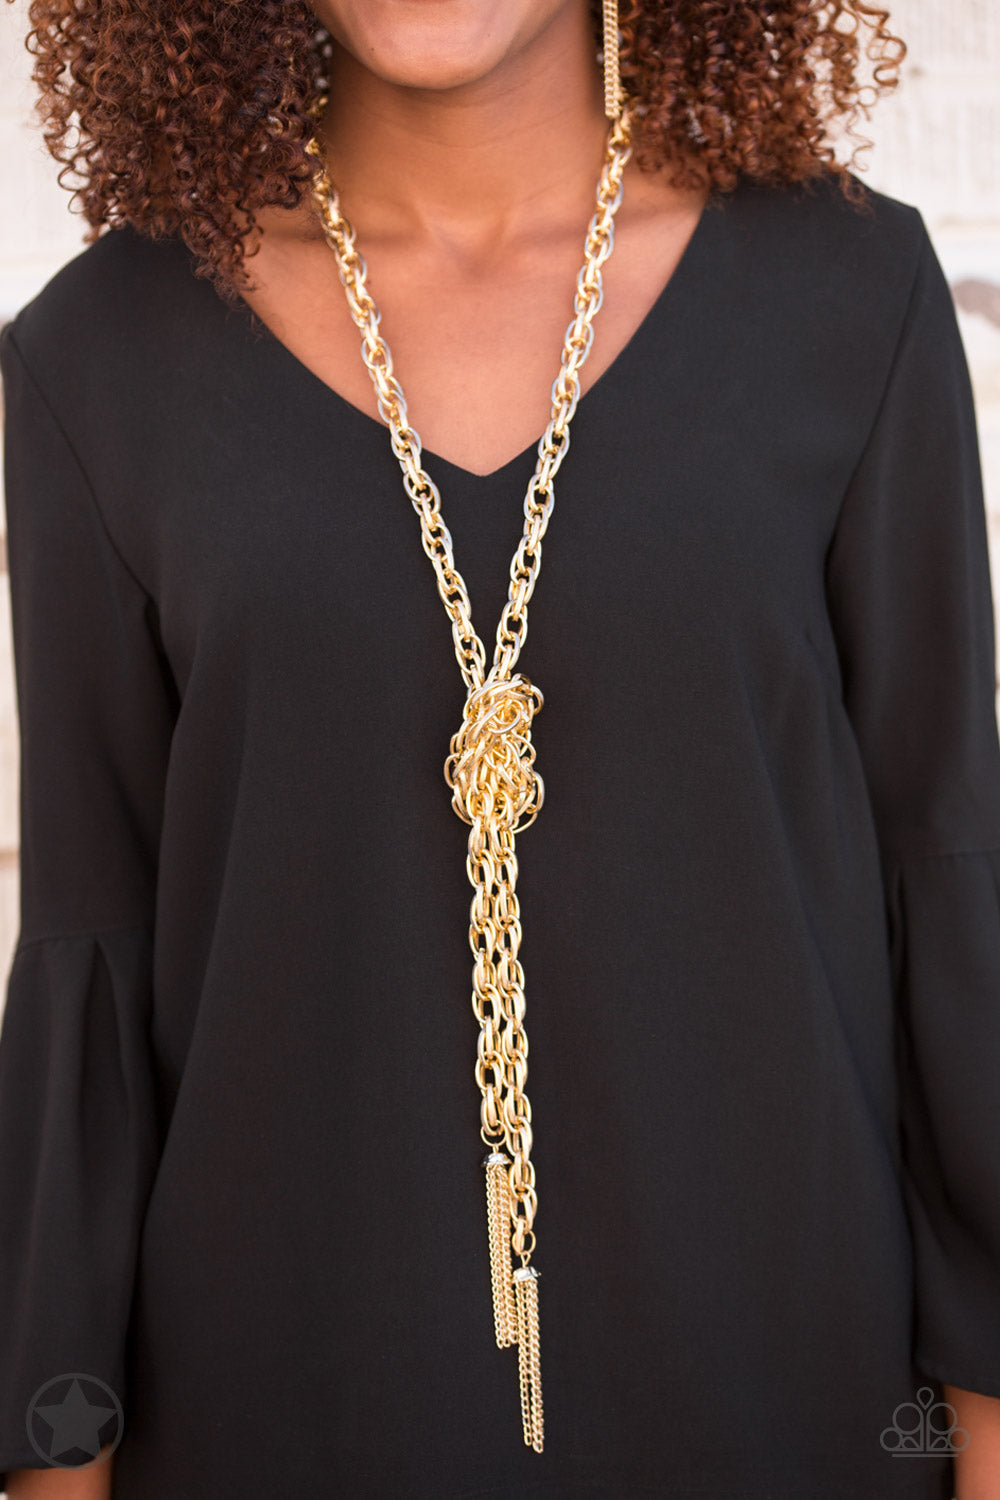 Paparazzi Accessories - SCARFed for Attention - Gold Necklace